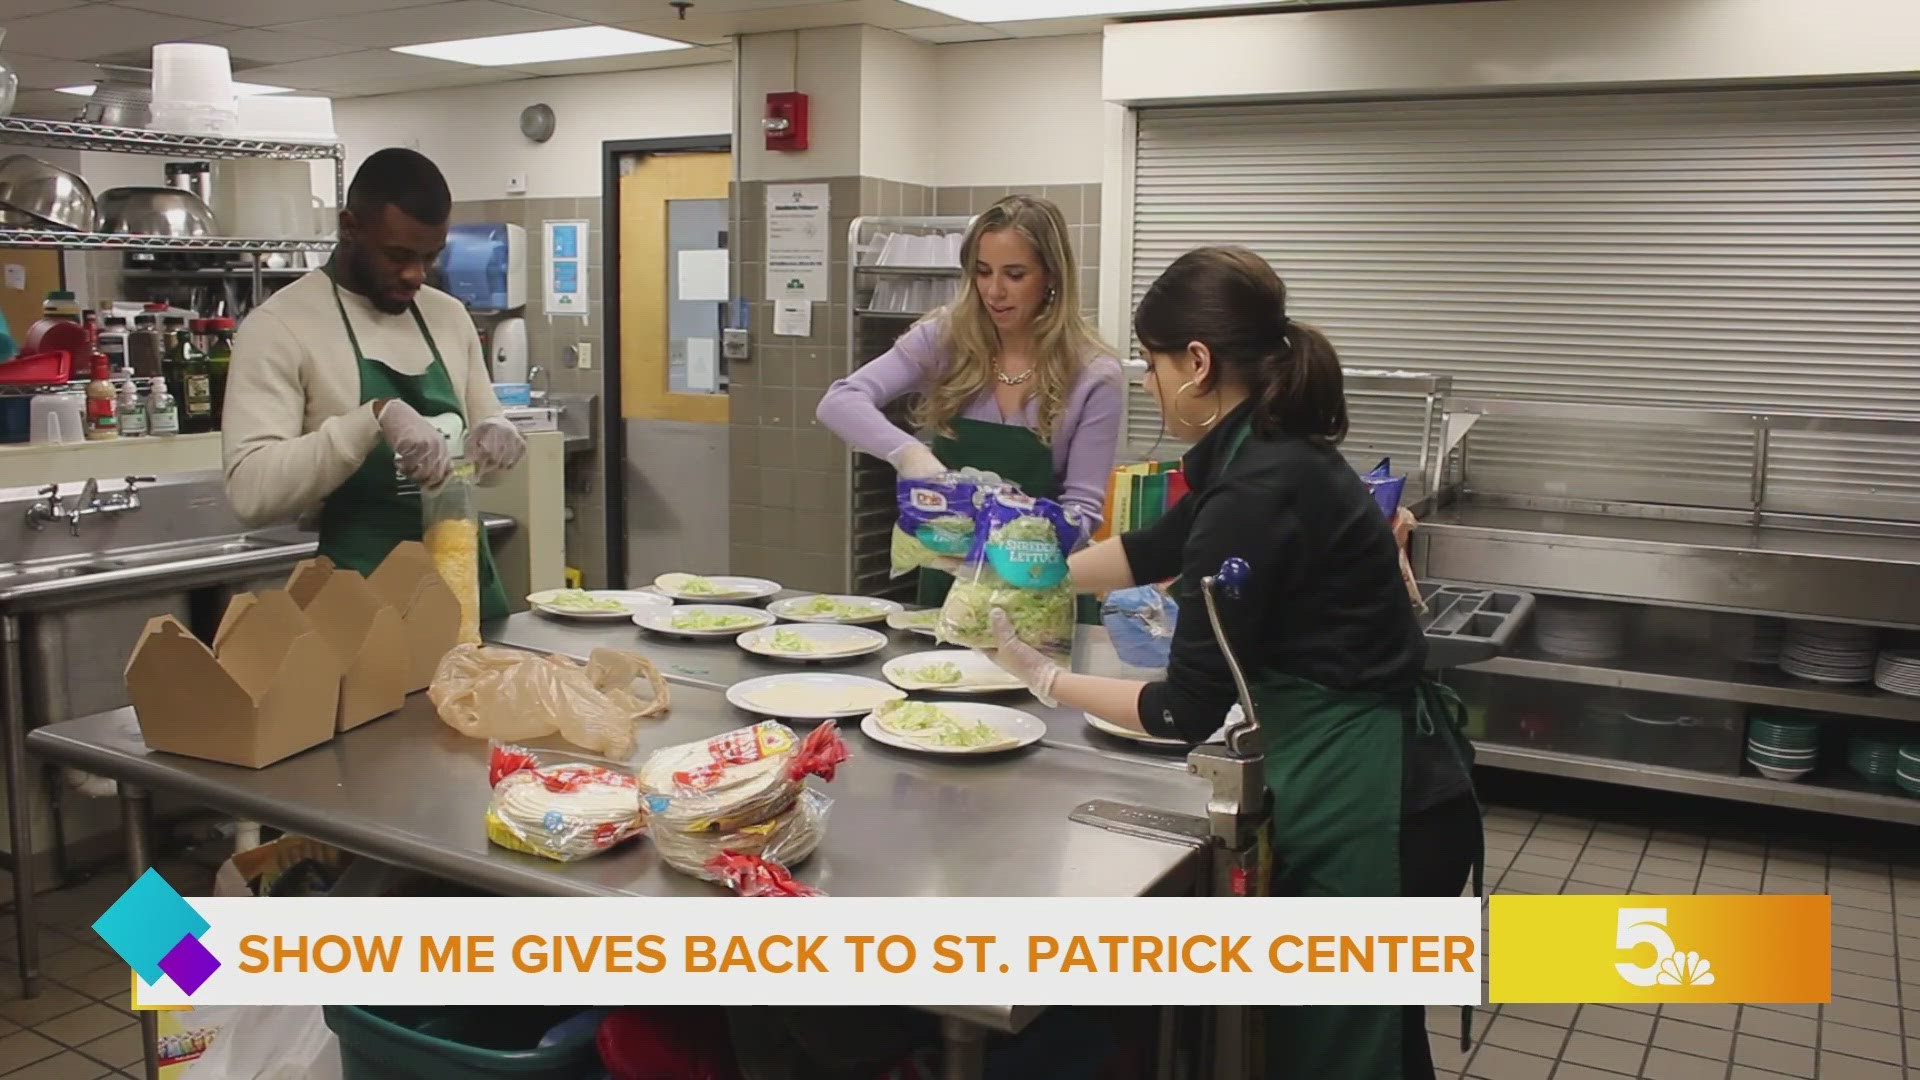 In 1983, St. Patrick Center was opened to combat homelessness in the city of St. Louis and surrounding areas. Now, assisting nearly 4,000 individuals and families.